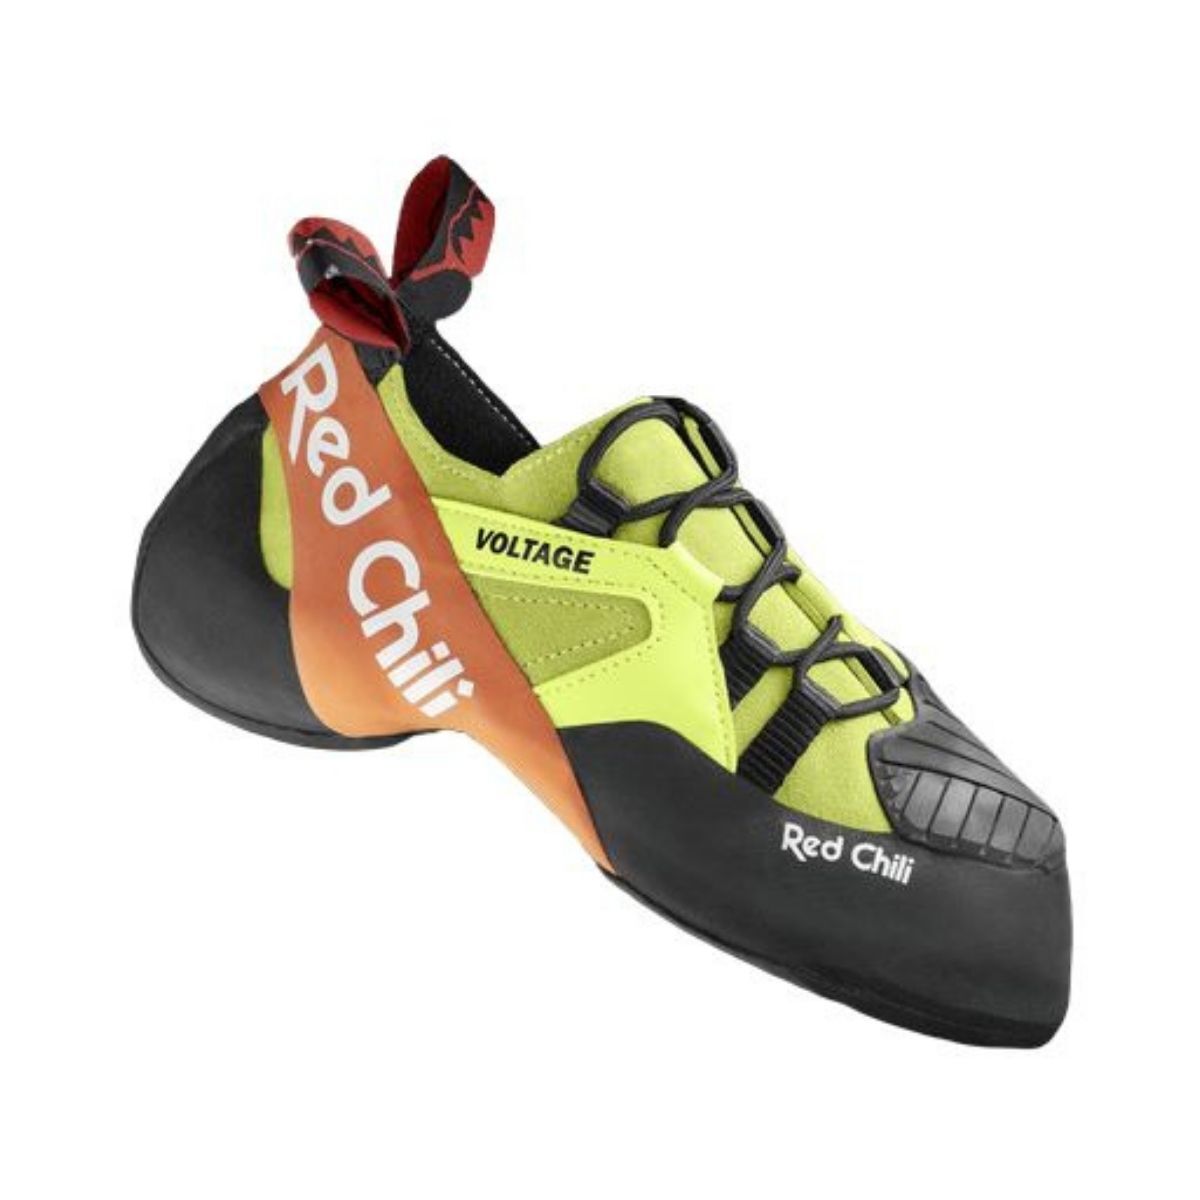 Red Chili Voltage Lace  - Climbing shoes